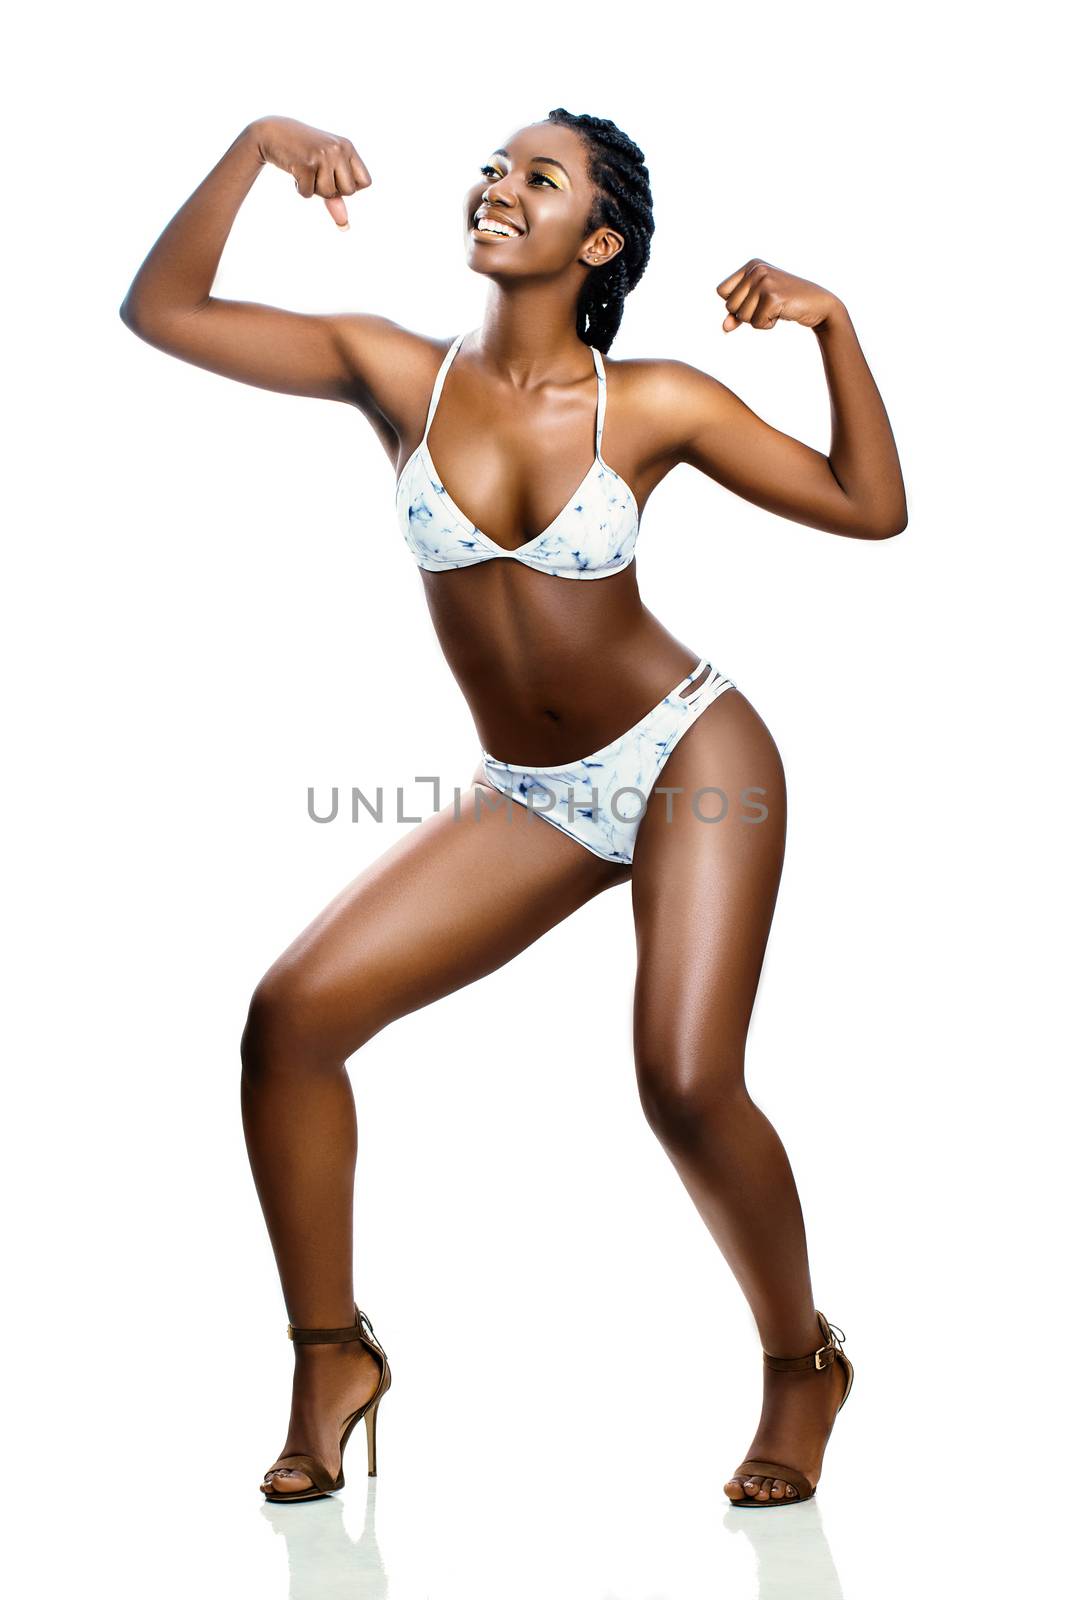 Attractive young african woman in bikini showing muscles. by karelnoppe